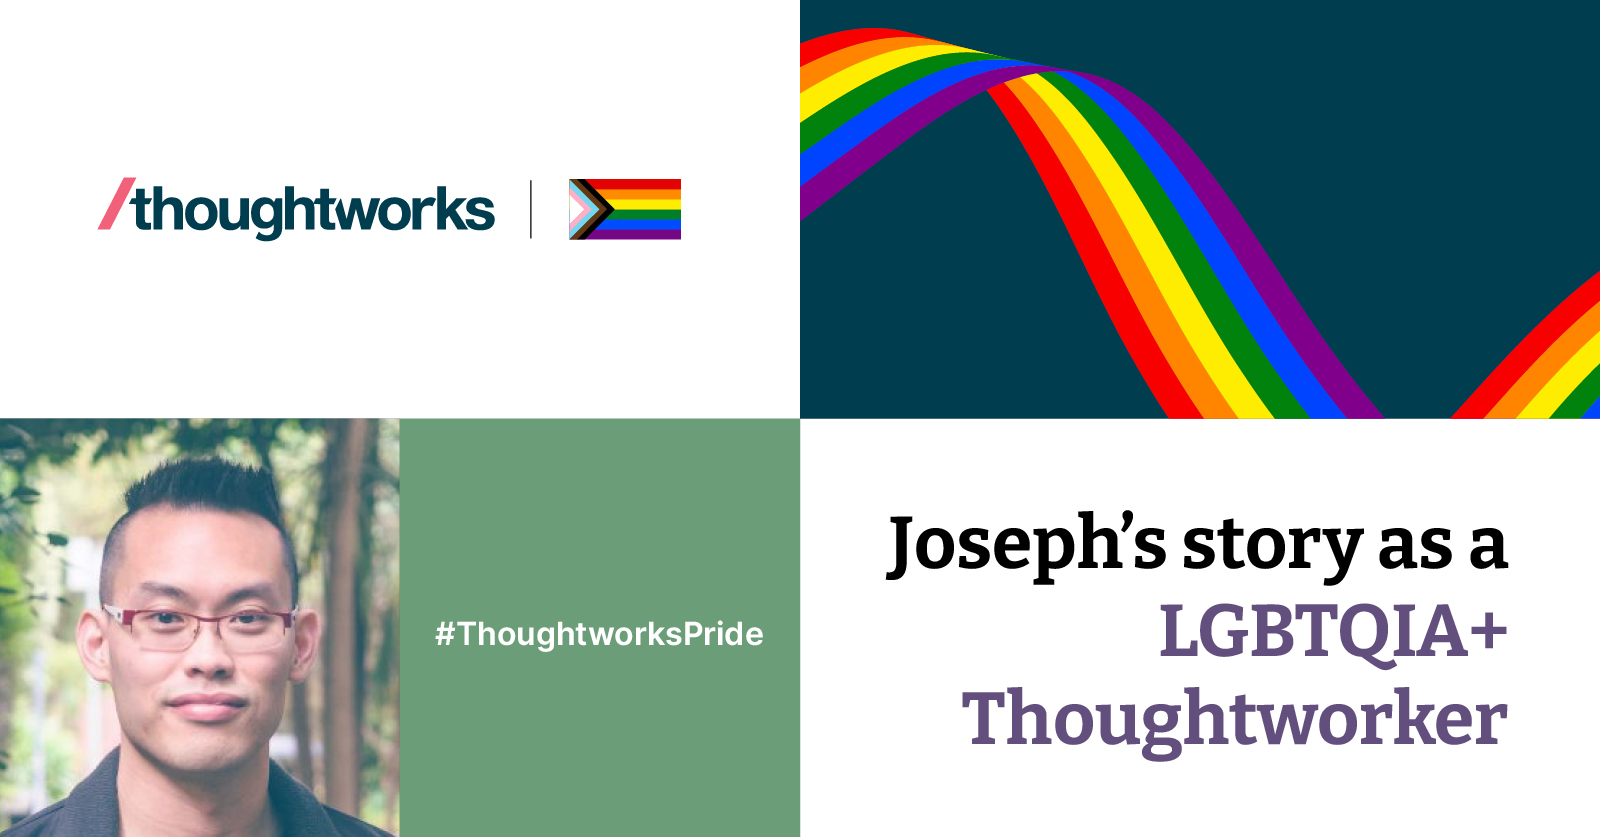 Joseph Chan story as a LGBTQIA plus Thoughtworker. Left hand side shows Joseph Chan headshot and right hand side shows Pride flag